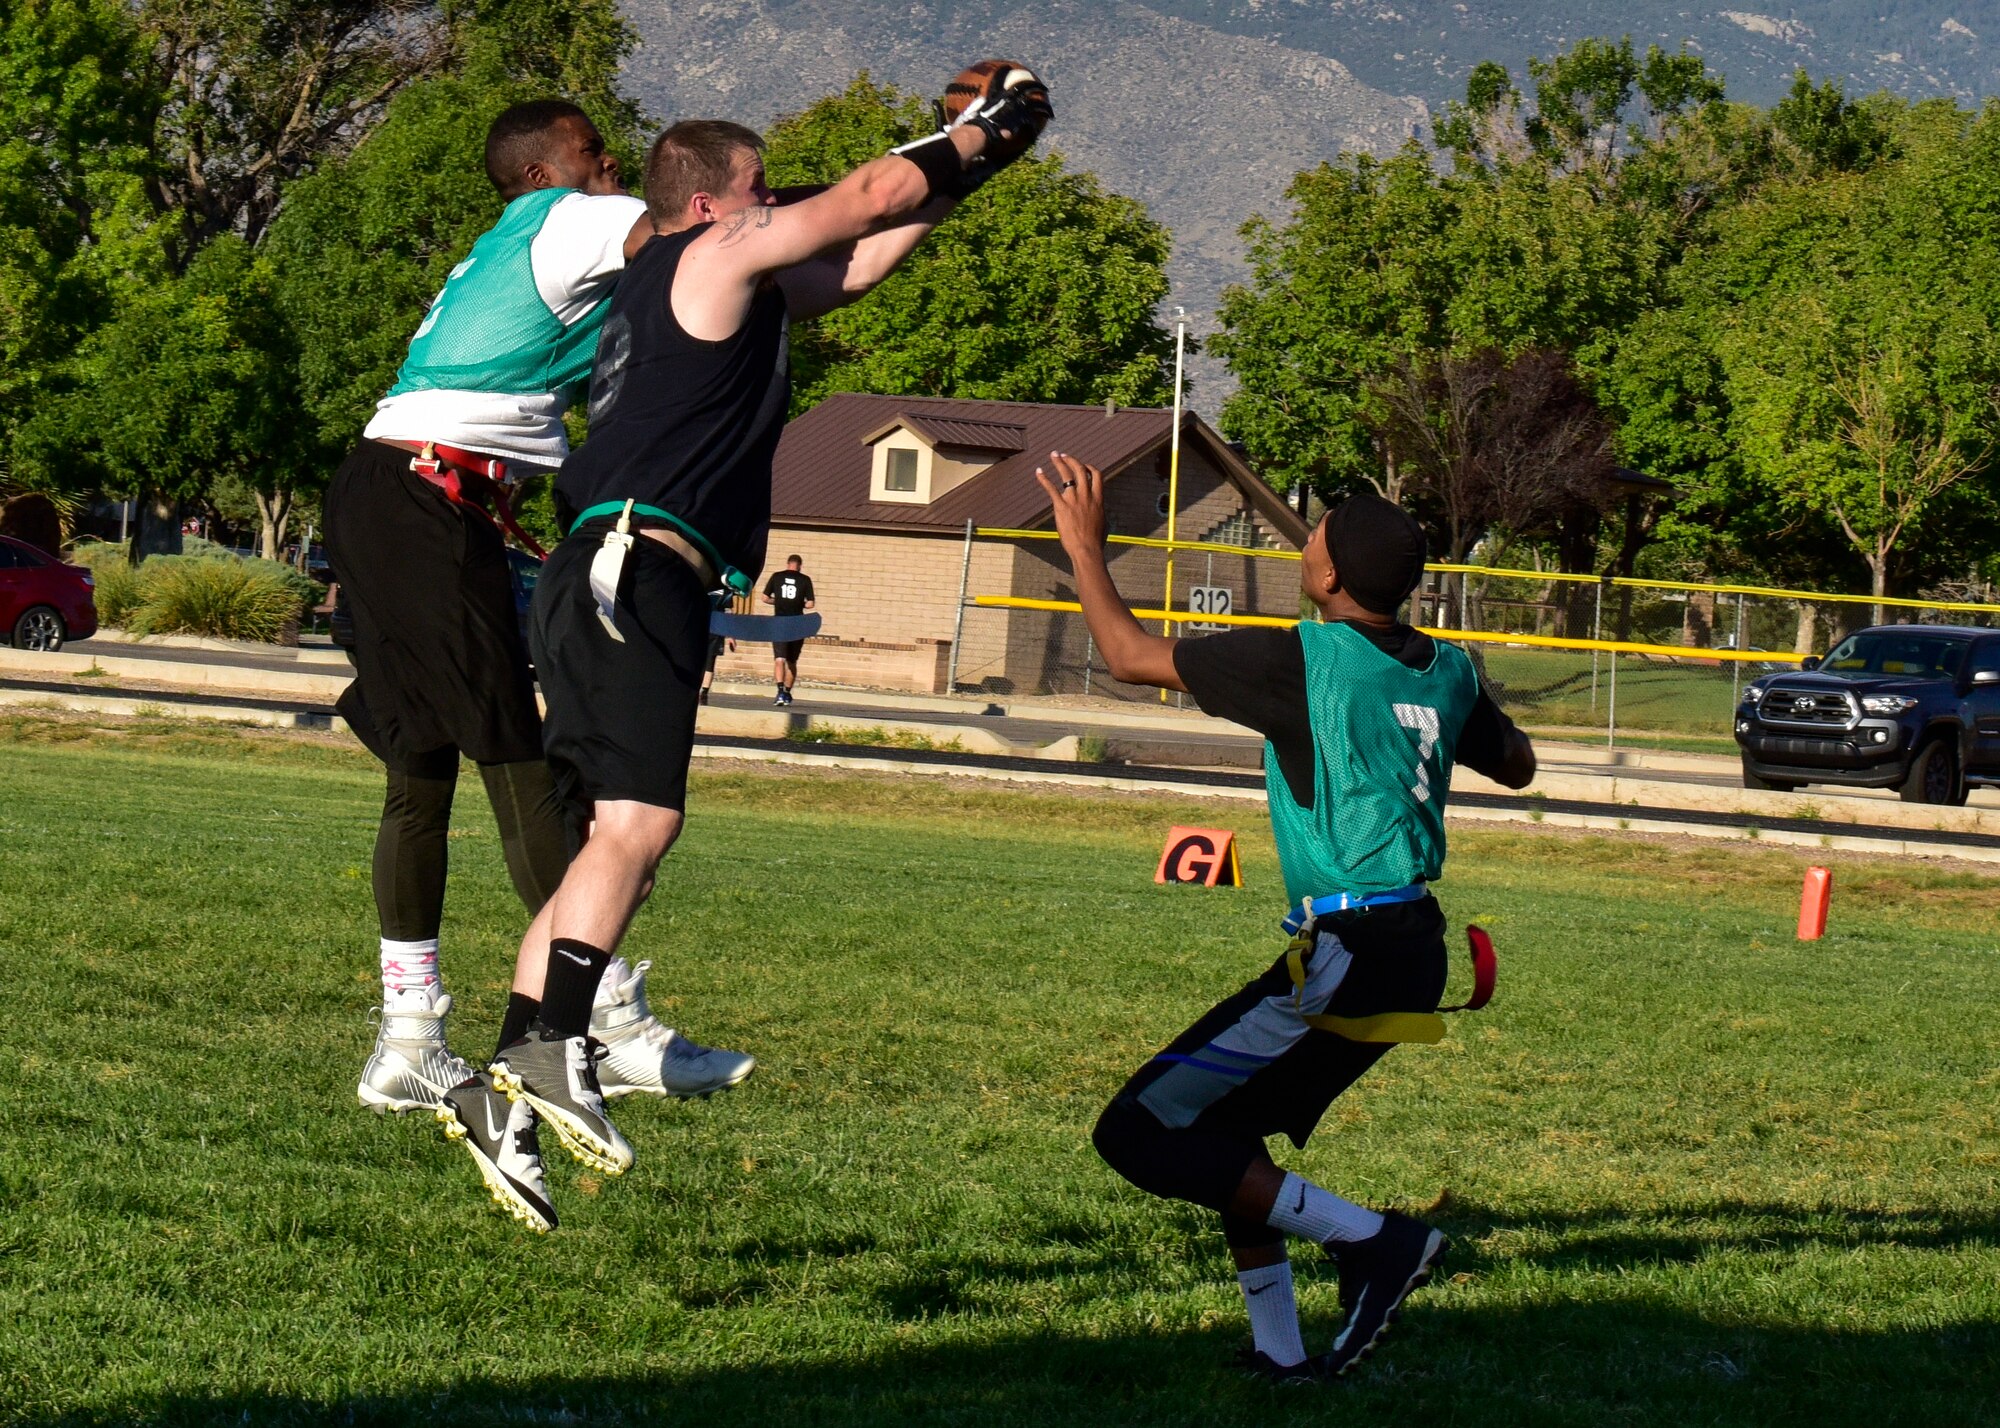 Tech. Sgt. Matthew Miller, safety for the 58th AMXS flag football team, intercepts a pass between two members of the WSSS-Joseph flag football team at Kirtland Air Force Base, N.M., Sept. 17, 2017. Each football game is split into two halves with each half lasting 20 minutes. (U.S. Air Force photo by Airman Austin J. Prisbrey)